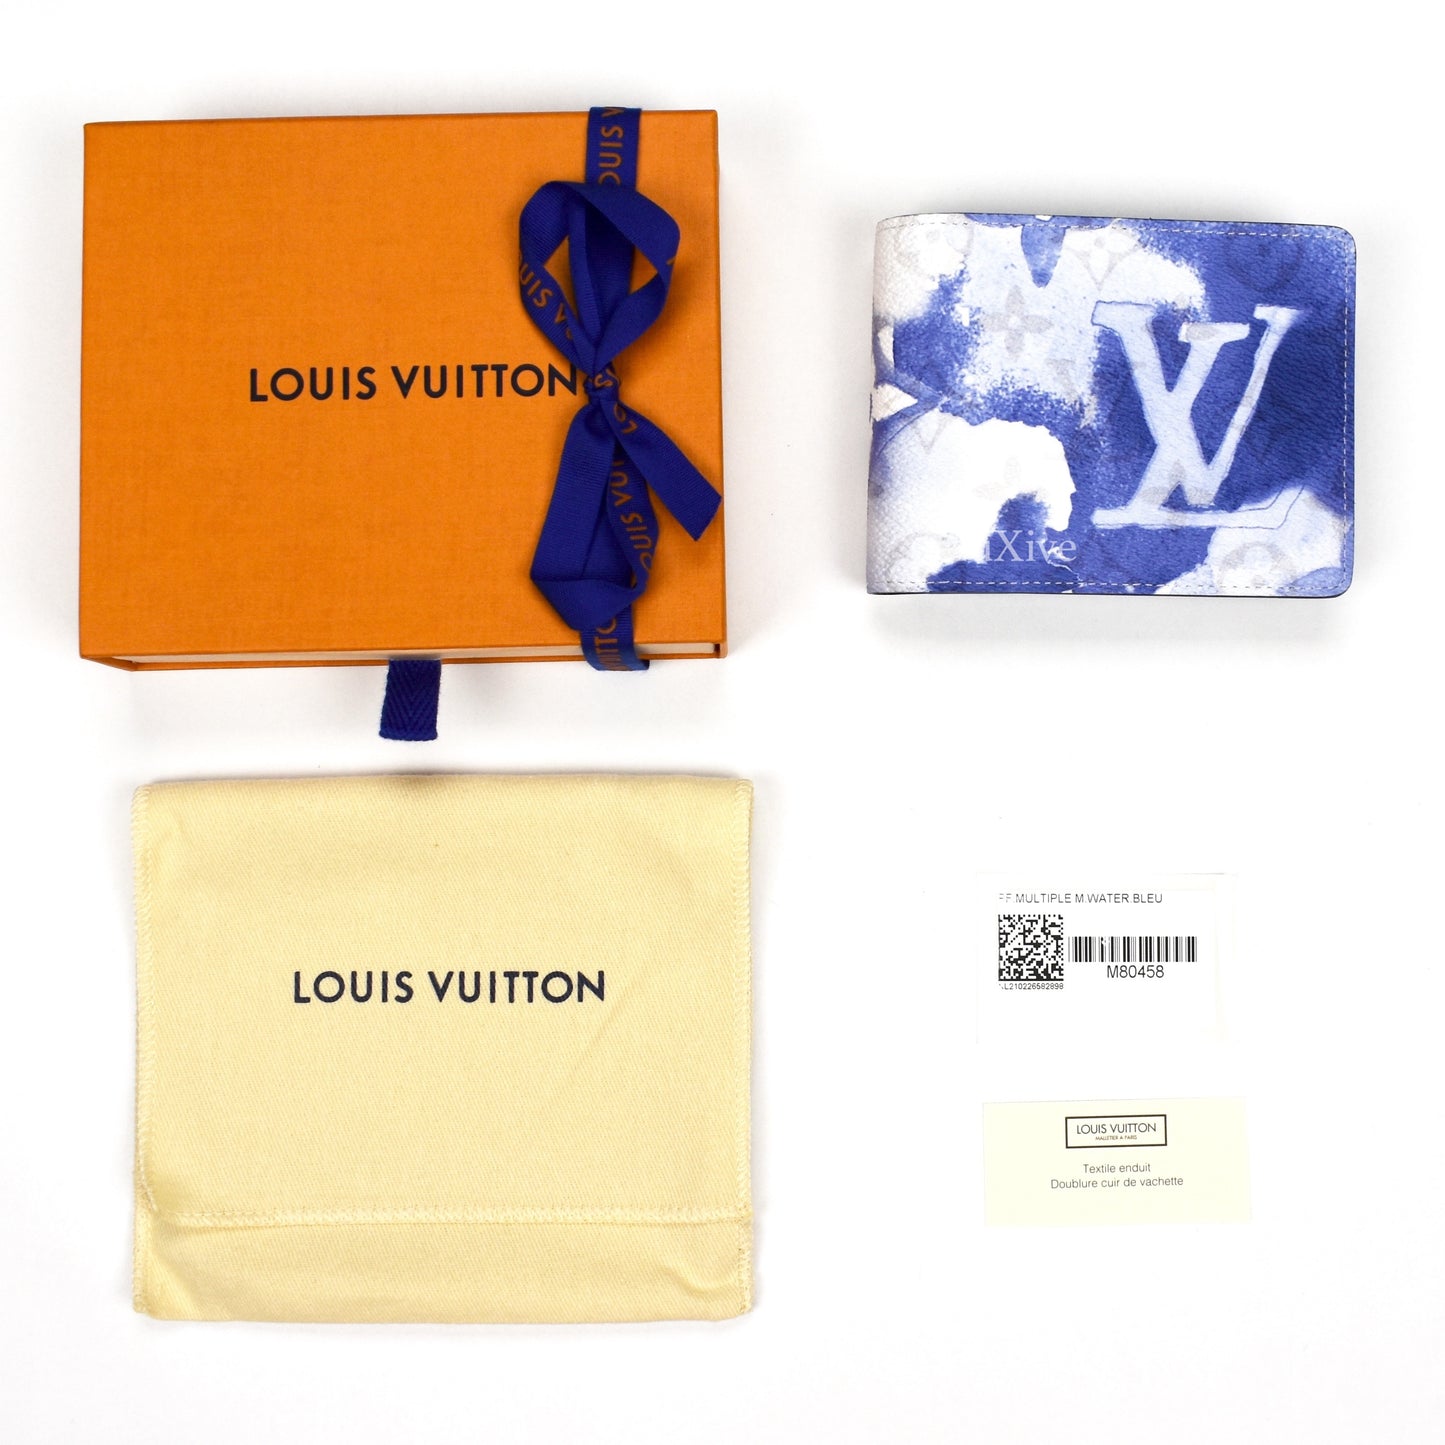 Extremely Rare Louis Vuitton Virgil Abloh Watercolor Wallet on